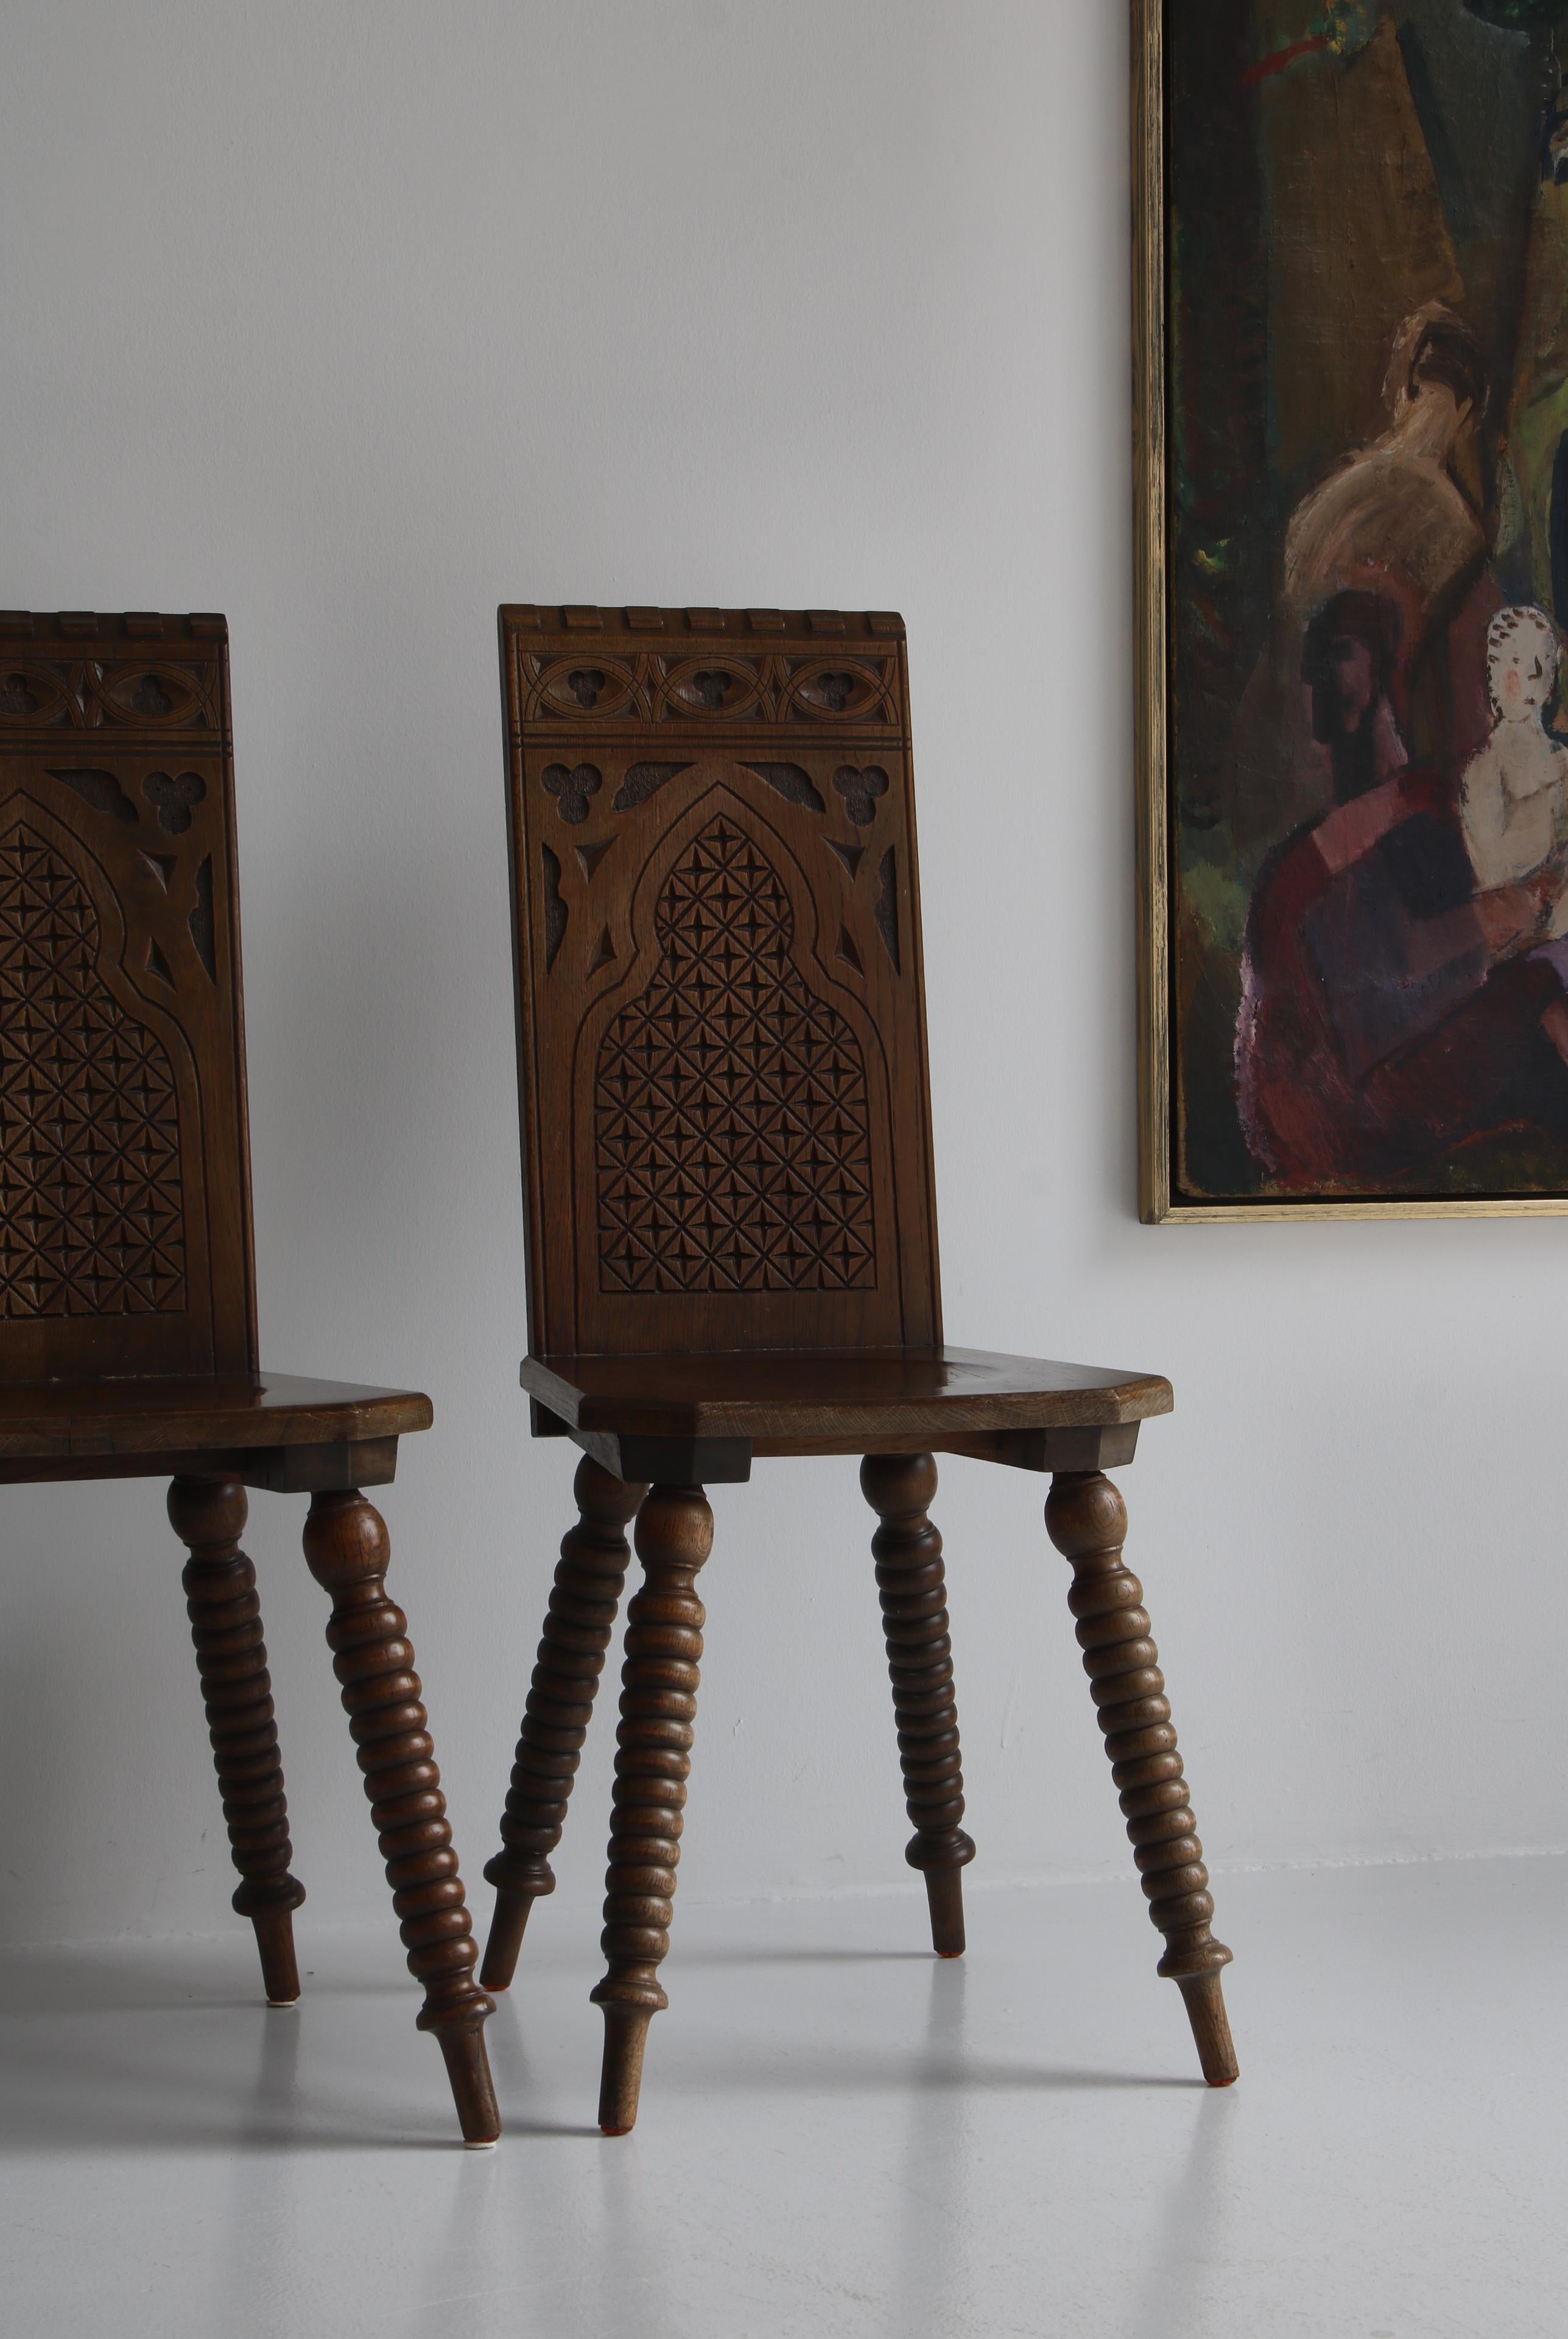 Amazing pair of side chairs in modern baroque style by a Scandinavian cabinetmaker in the early 20th. century. The dark stained oak are masterfully carved and decorated with abstract motifs. The chairs have a distinct expressions that adds